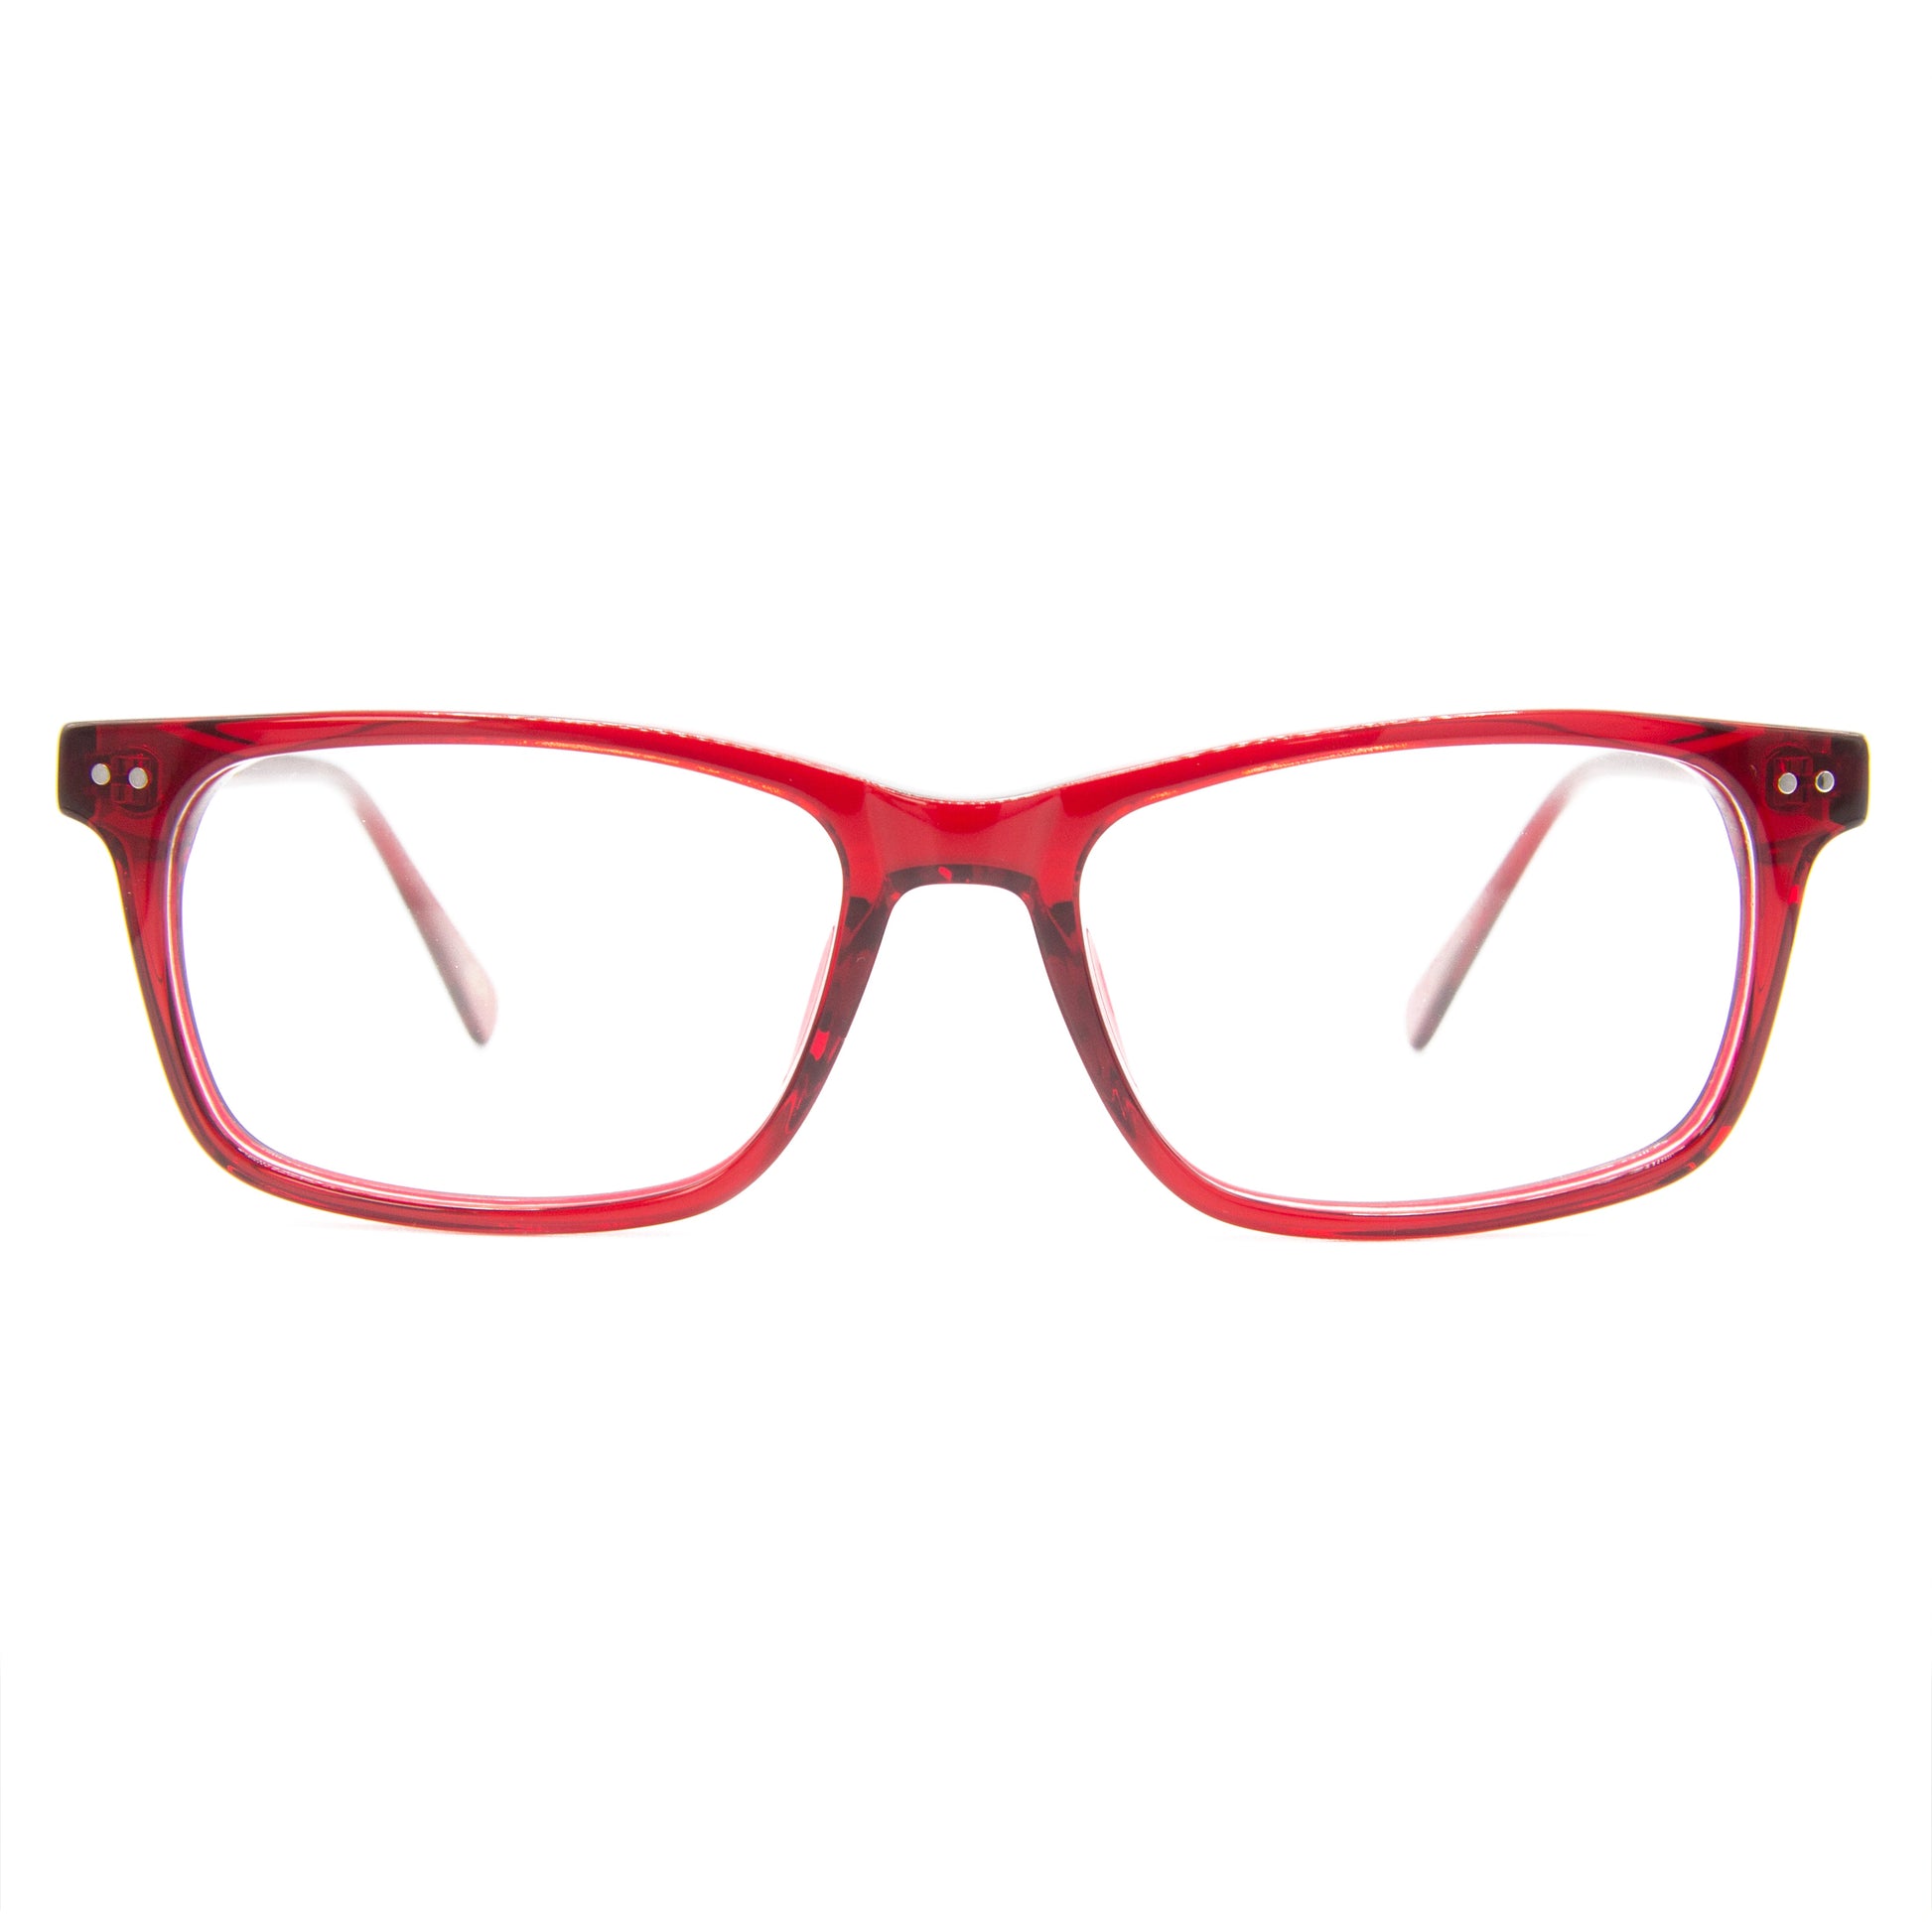 3 brothers - Mr Fred - Red - Prescription Glasses